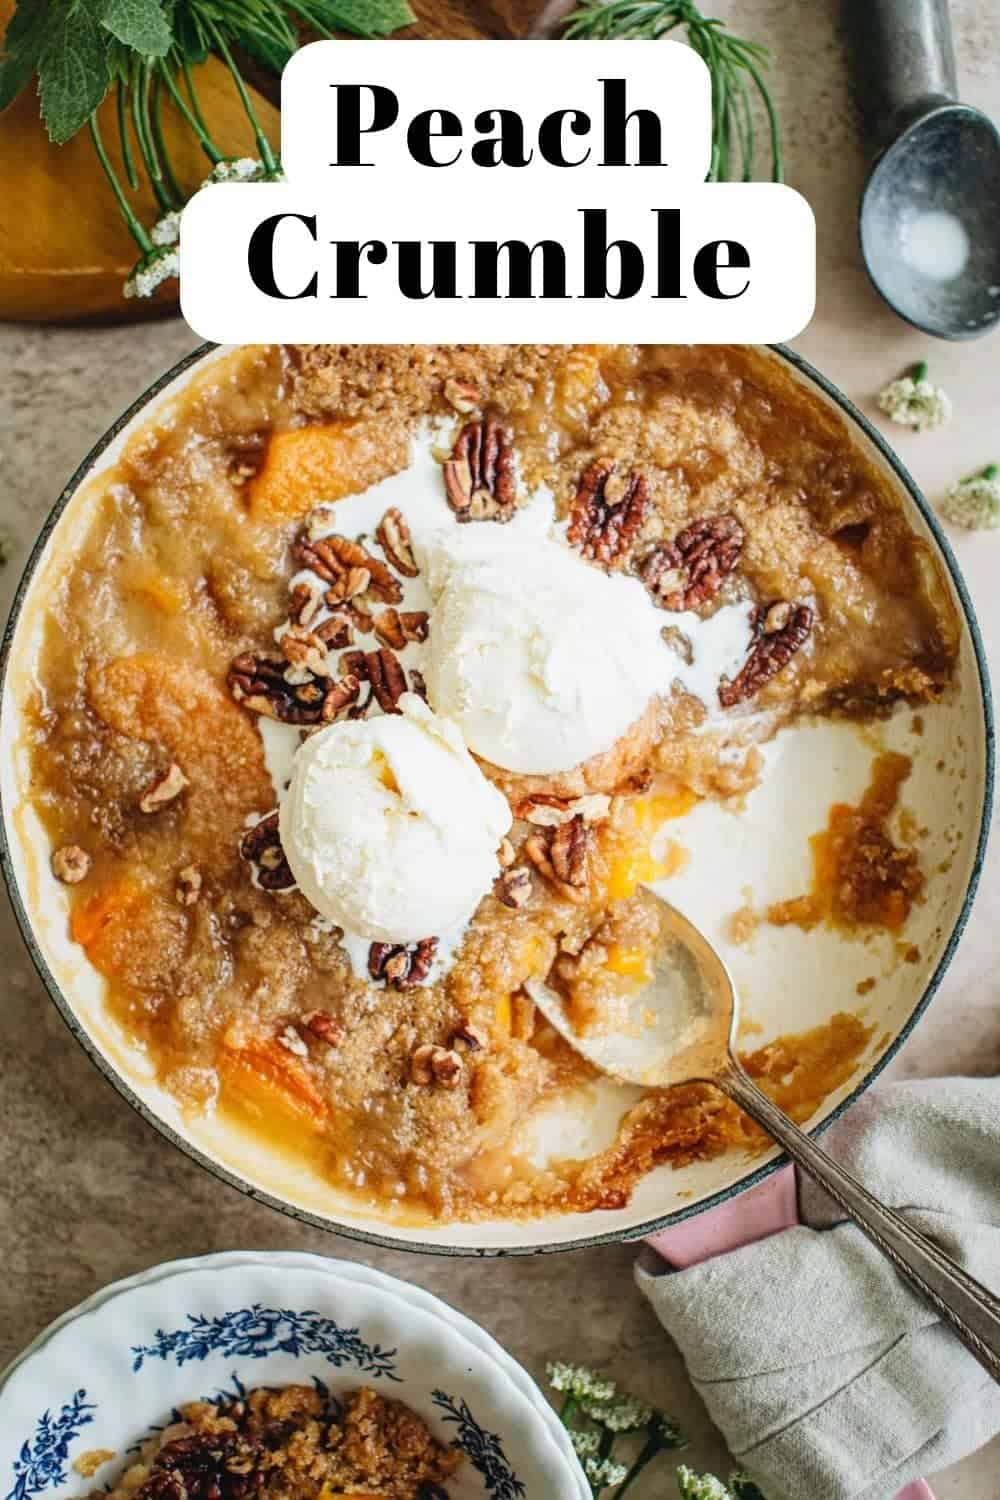 Peach crumble recipe in a pink skillet topped with ice cream.